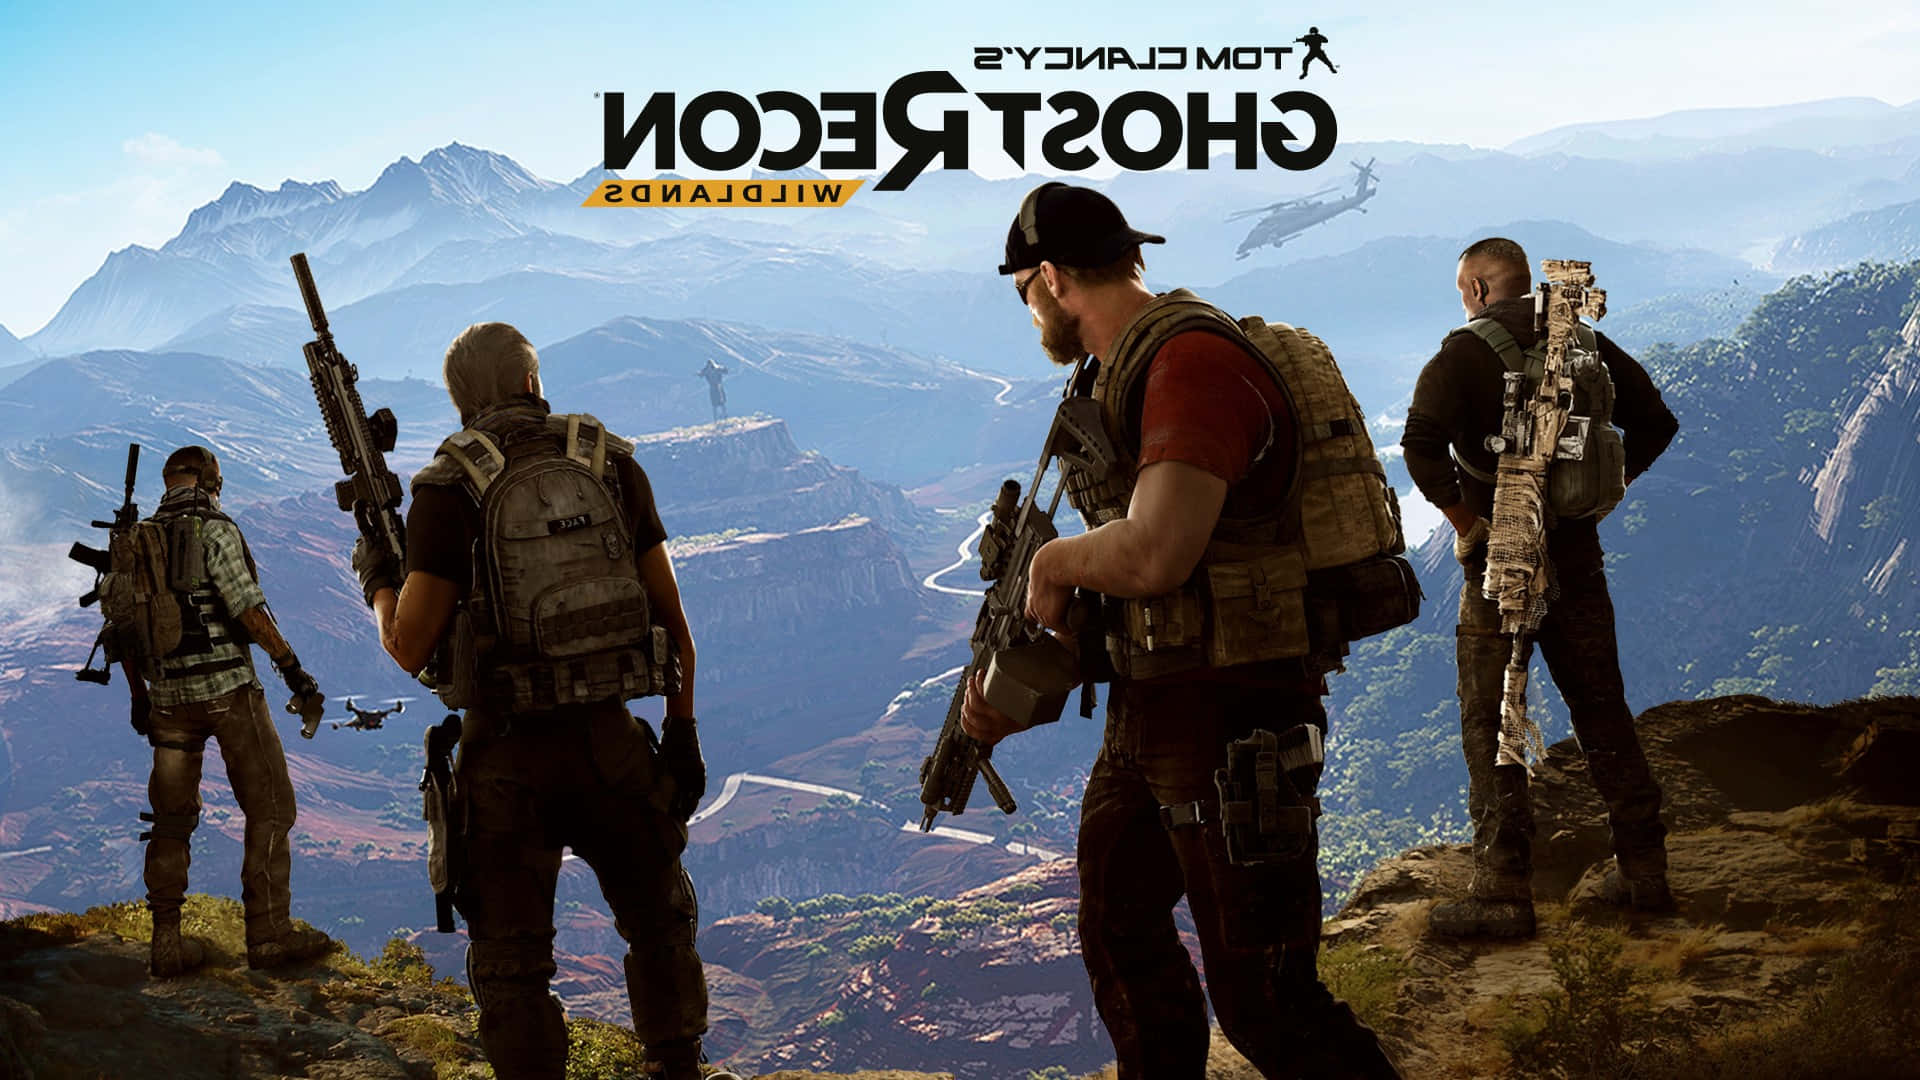 Play in a fully interactive open world with Ghost Recon Wildlands